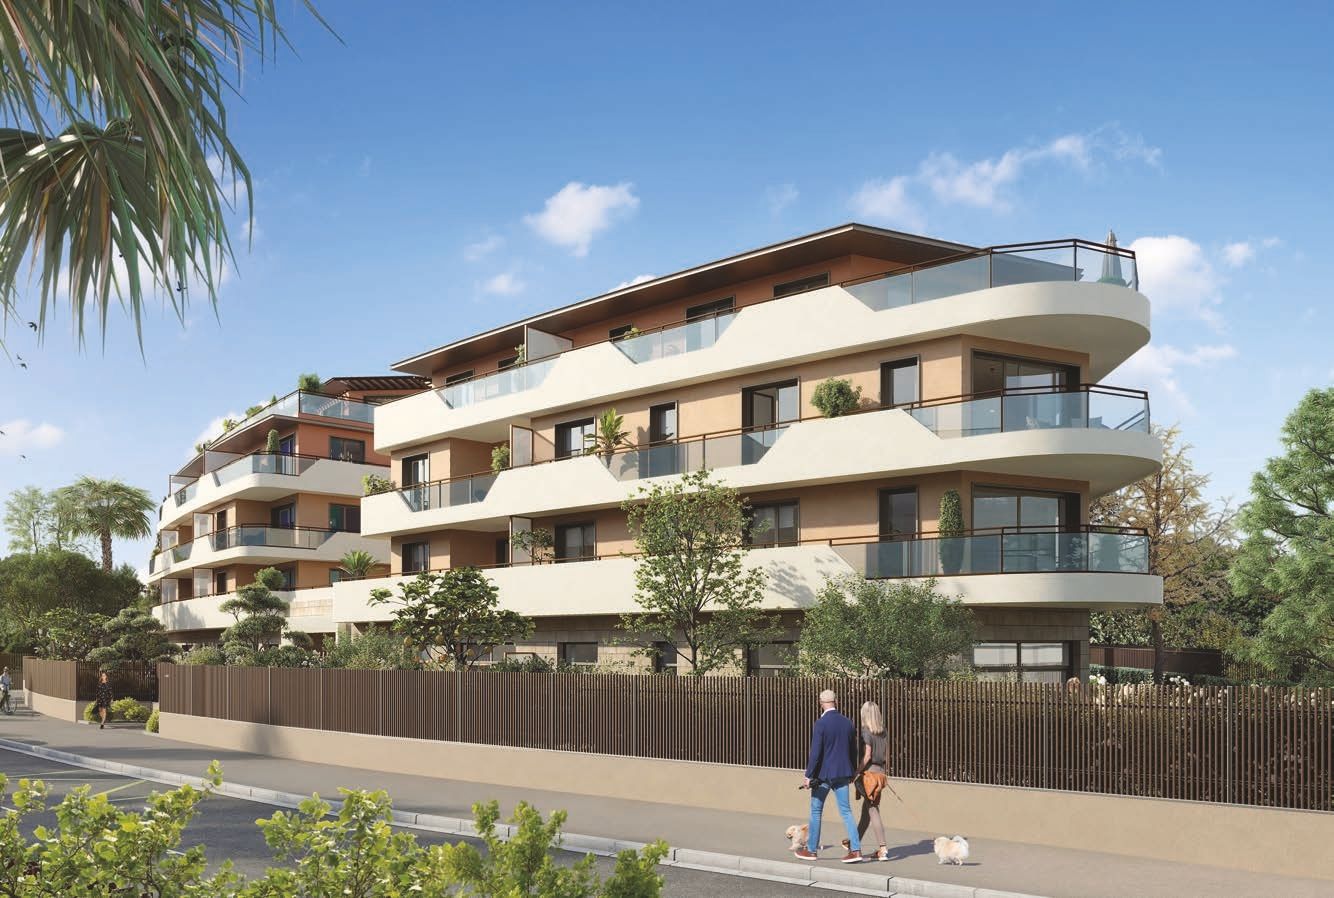 3 bed Apartment For Sale in French Riviera, South of France